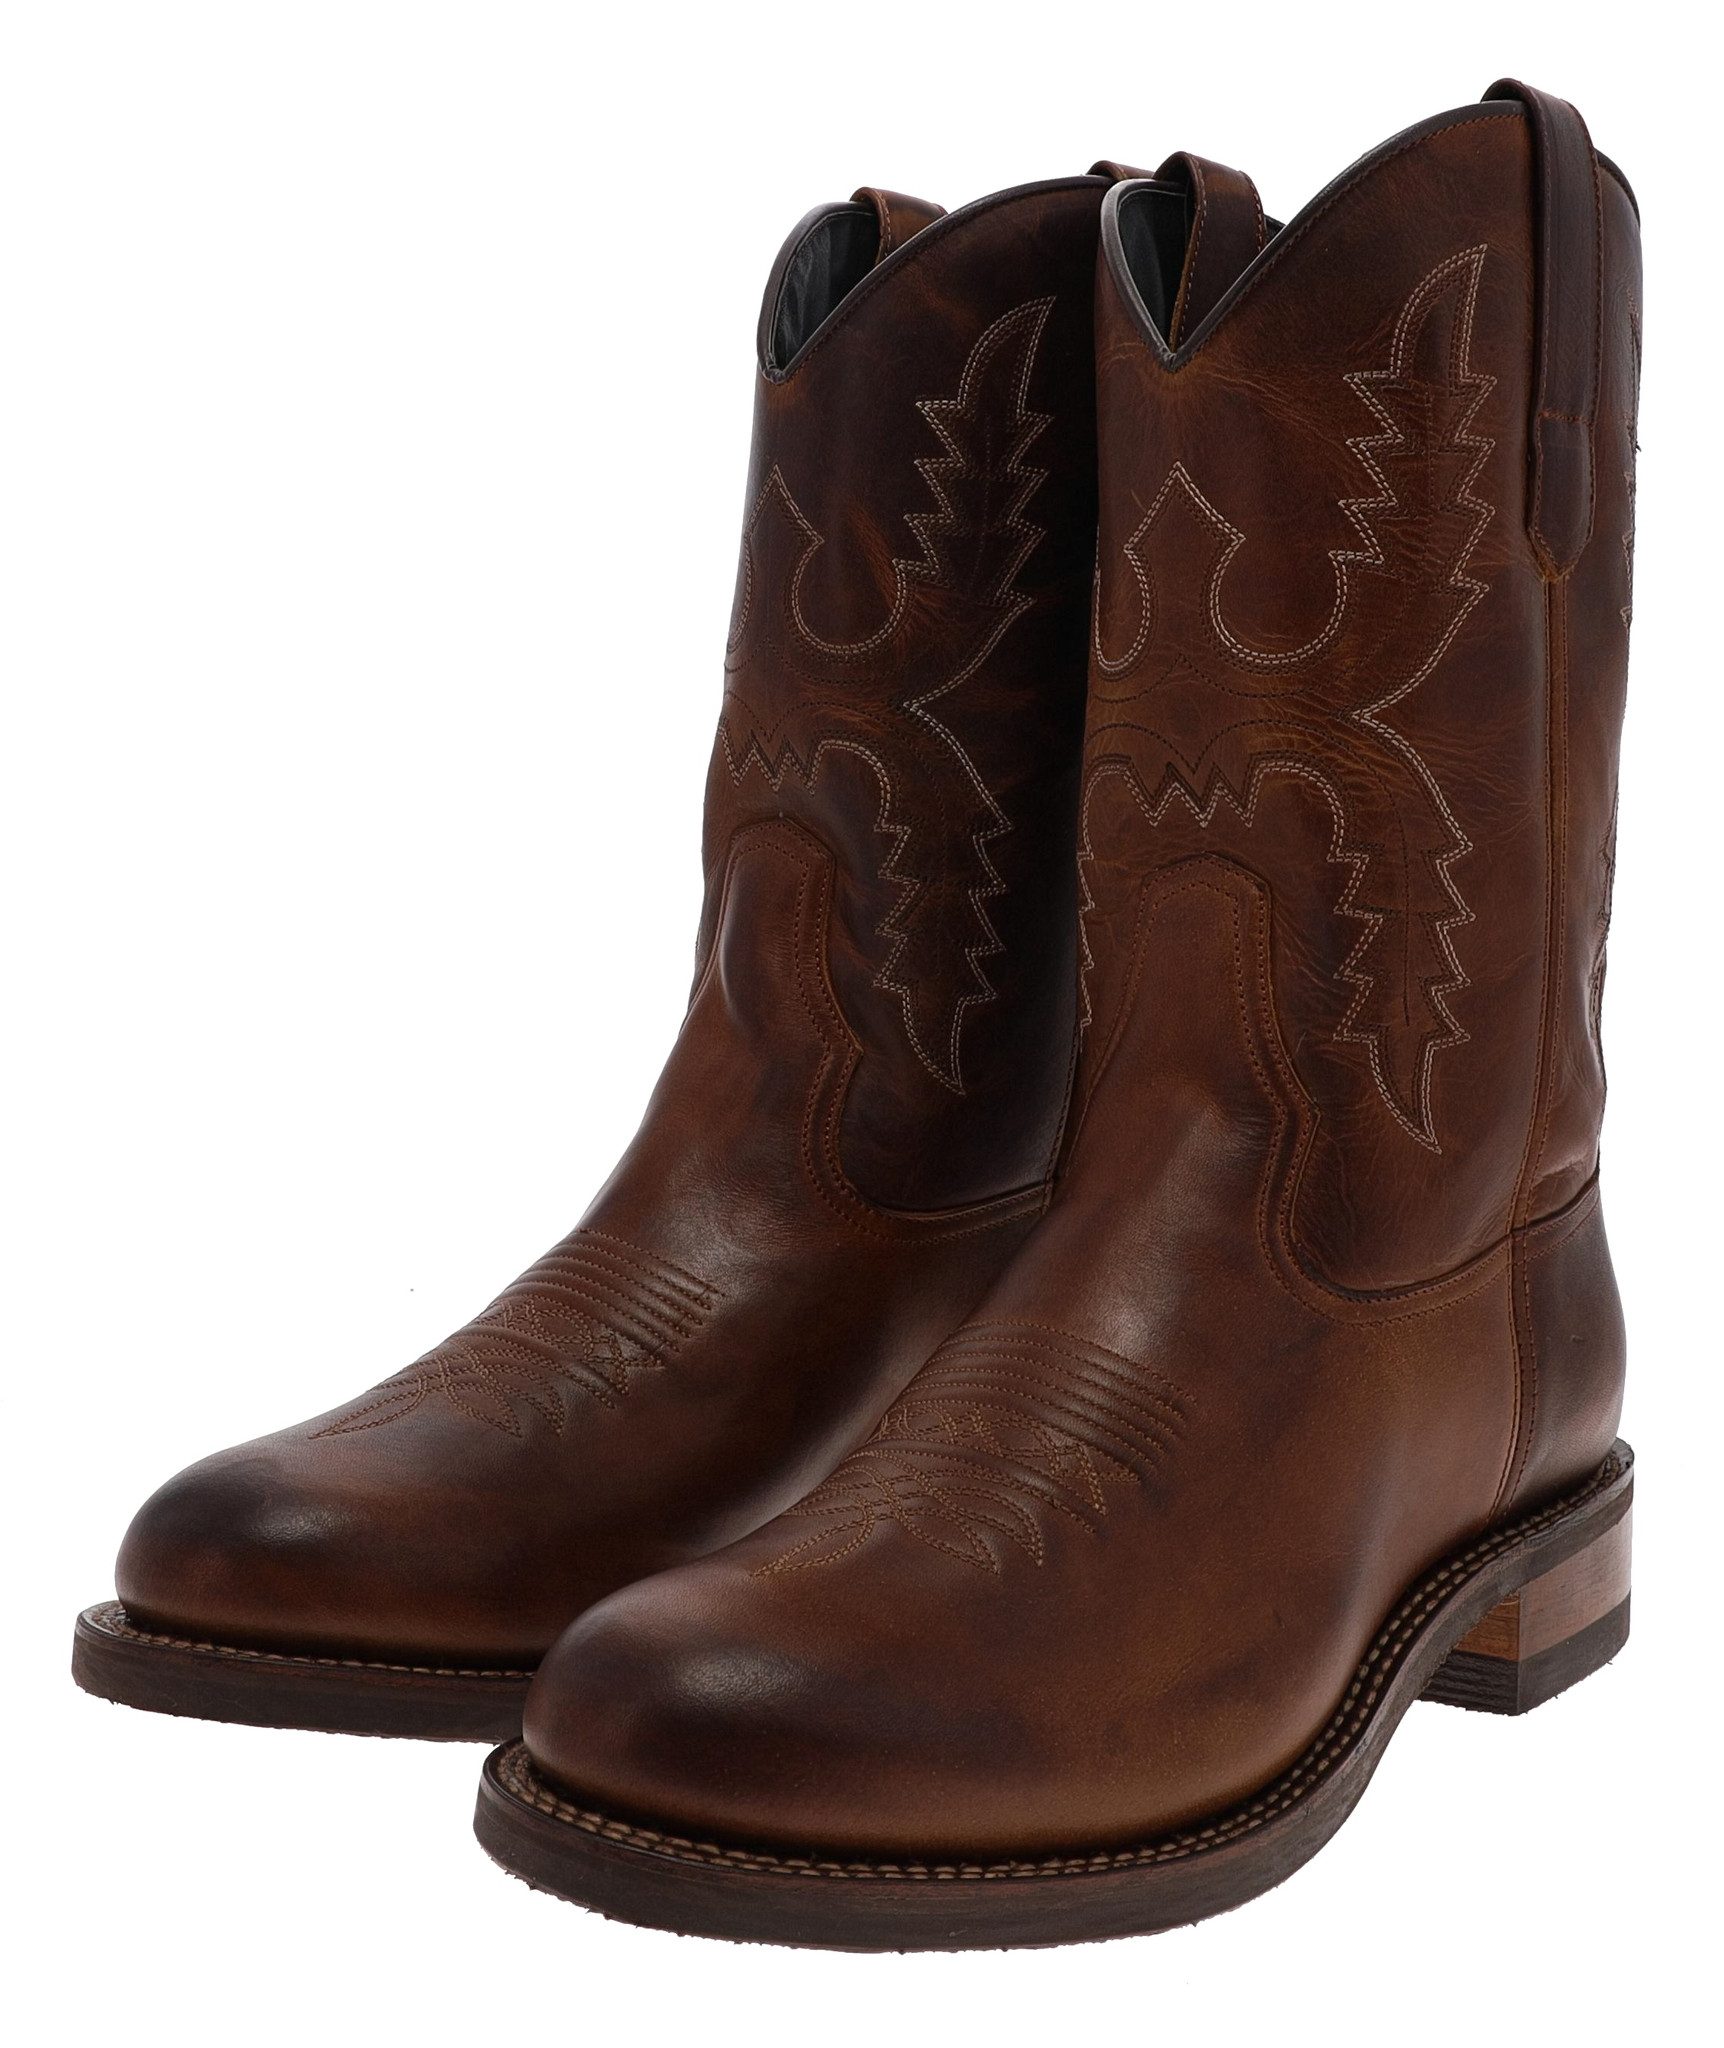 Sendra Boots 14340 LAM Braun Stiefel Thinsulate Isolierung